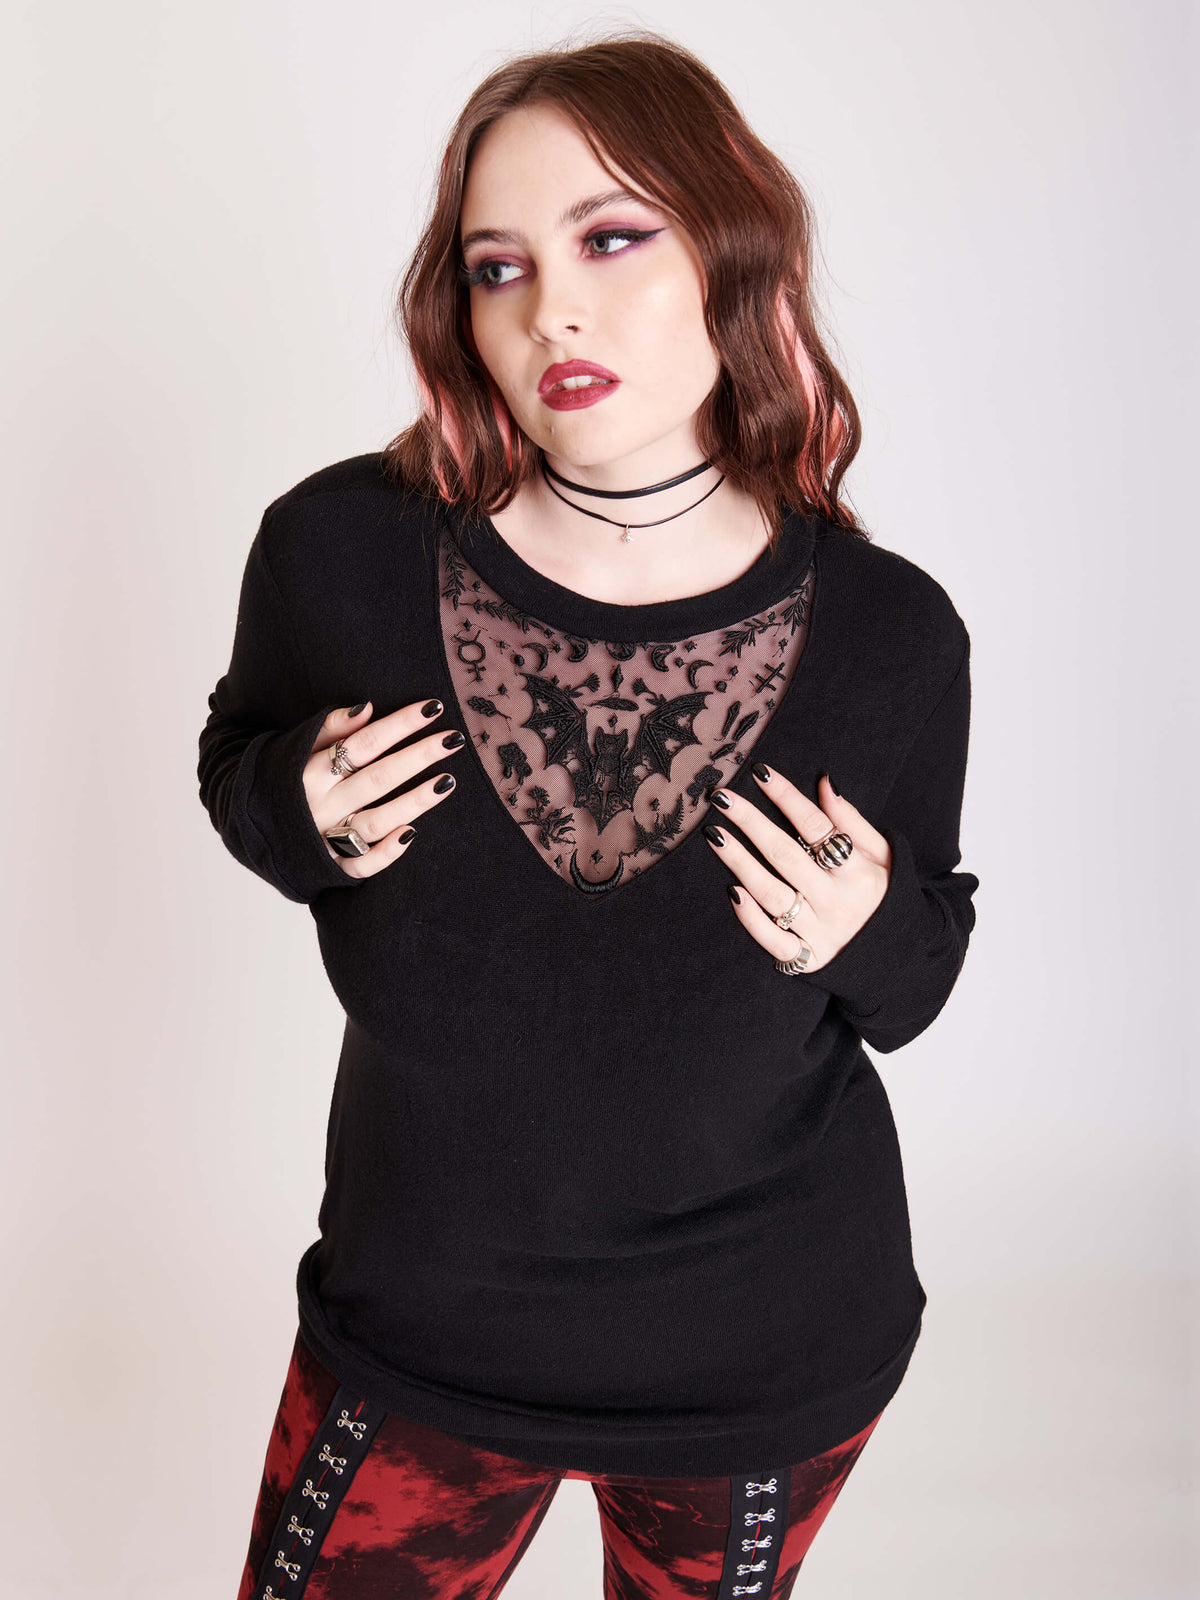 embroidered bat detail on black long sleeve top